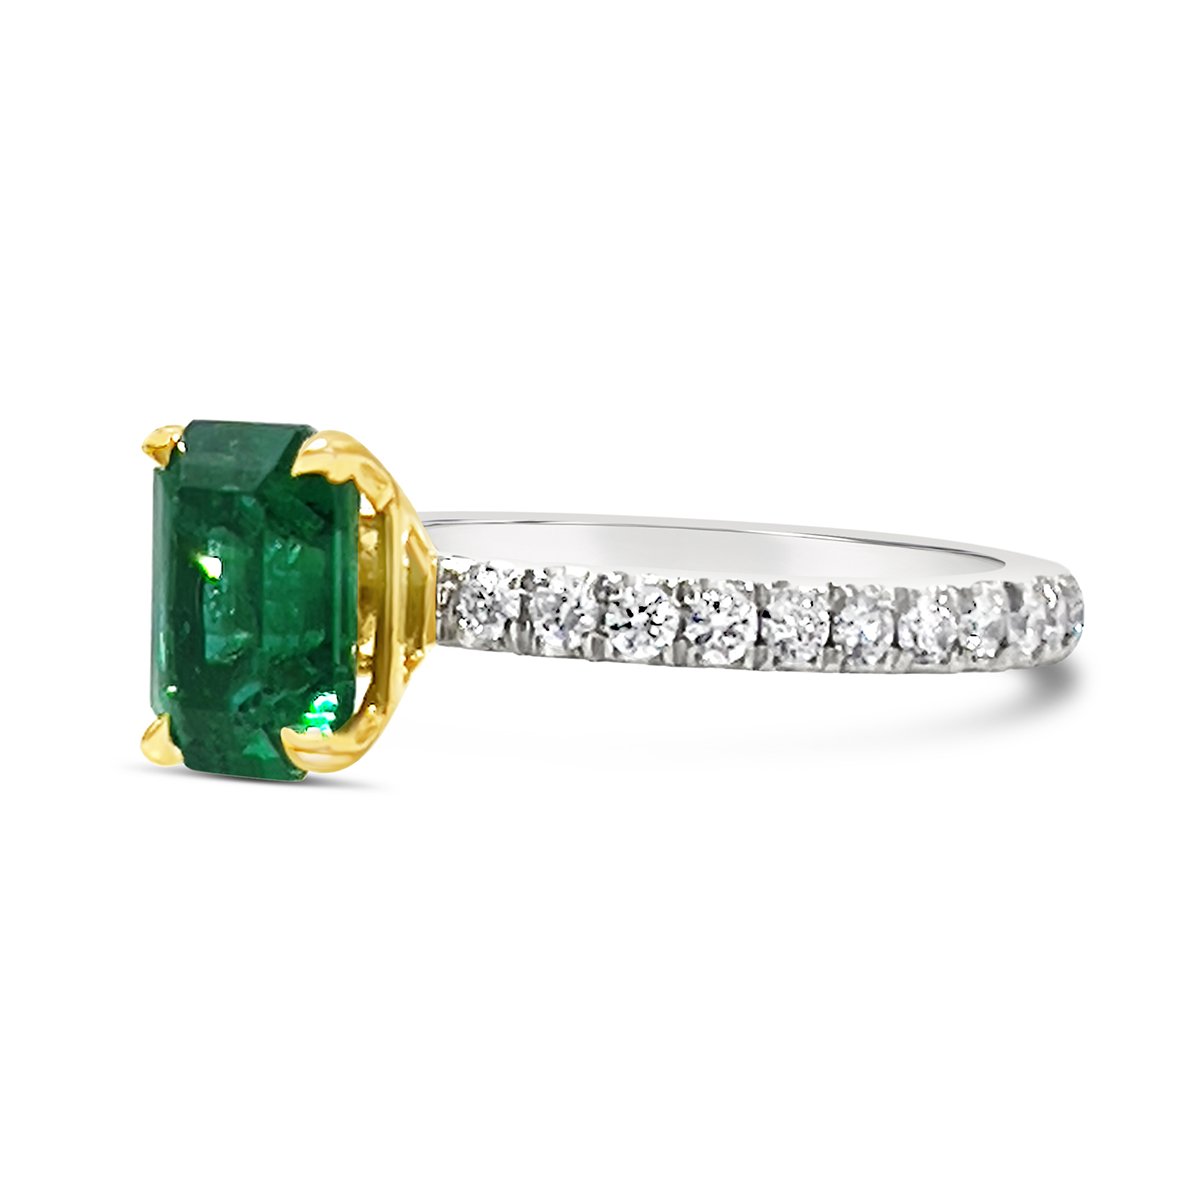 Grandmother's Emerald cocktail ring : r/jewelry